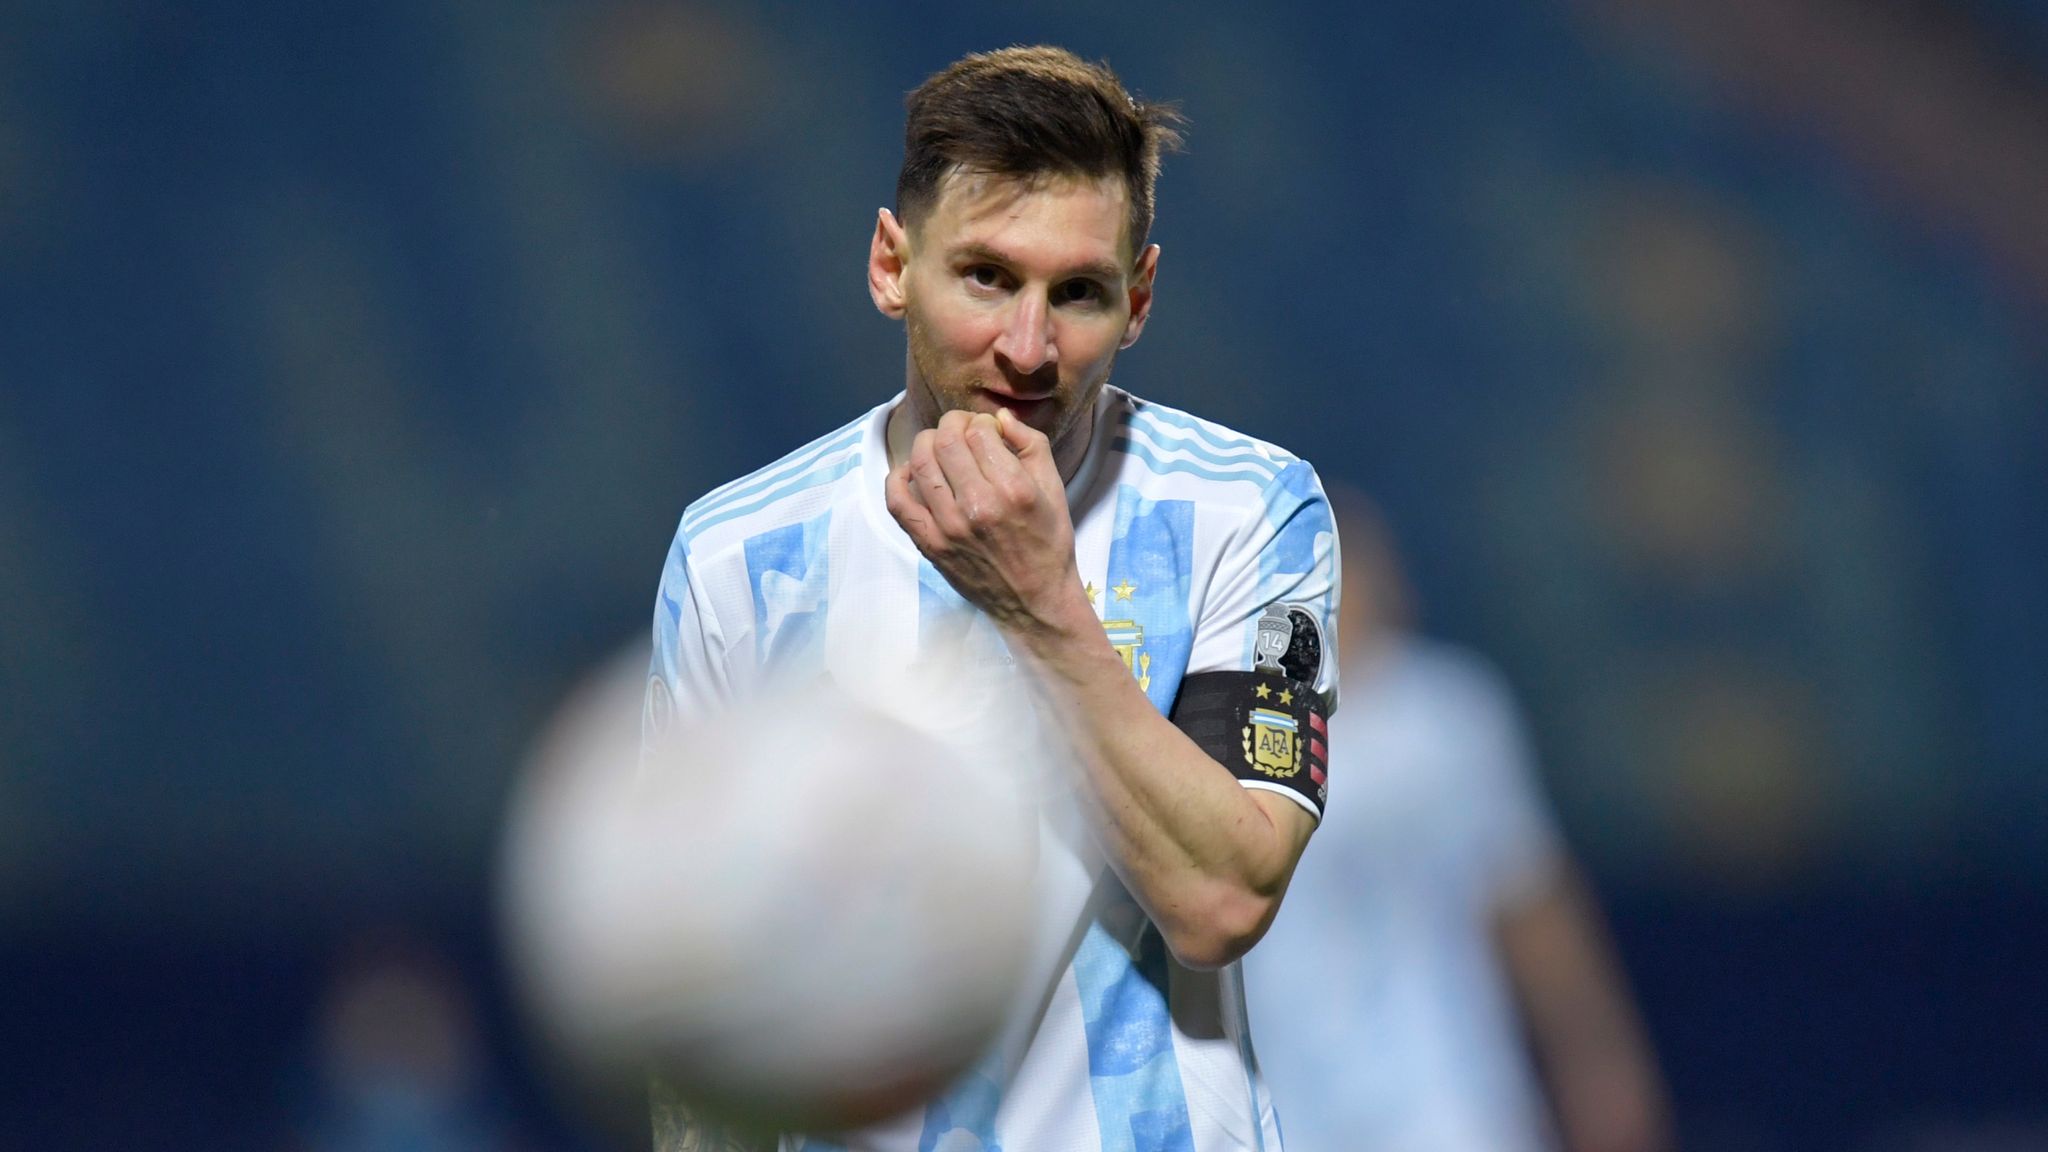 Lionel Messi is lighting up the Copa America with Argentina and now the final in the Maracana looms large